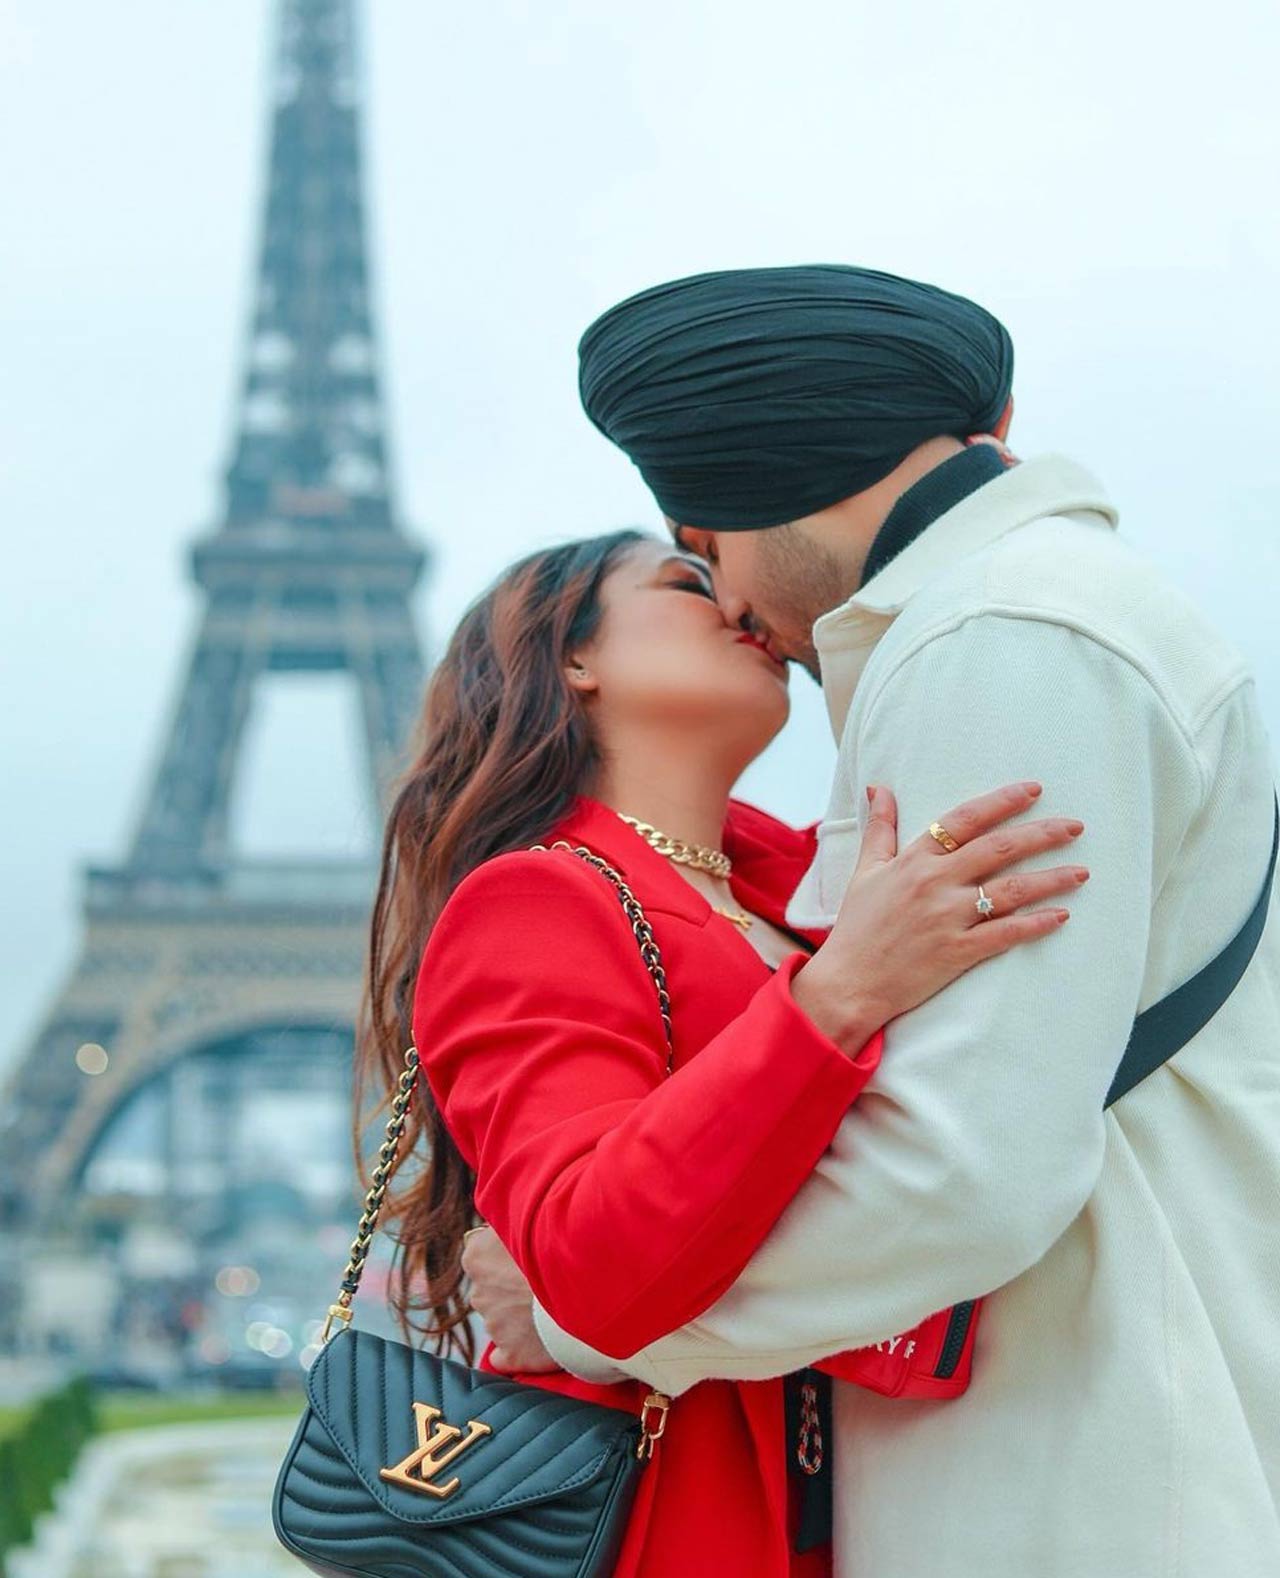 This picture of Neha Kakkar, Rohanpreet Singh getting intimate against the backdrop of the Eiffel Tower in the city of love, Paris is one of their most liked pictures on social media. The caption by Neha was apt- 